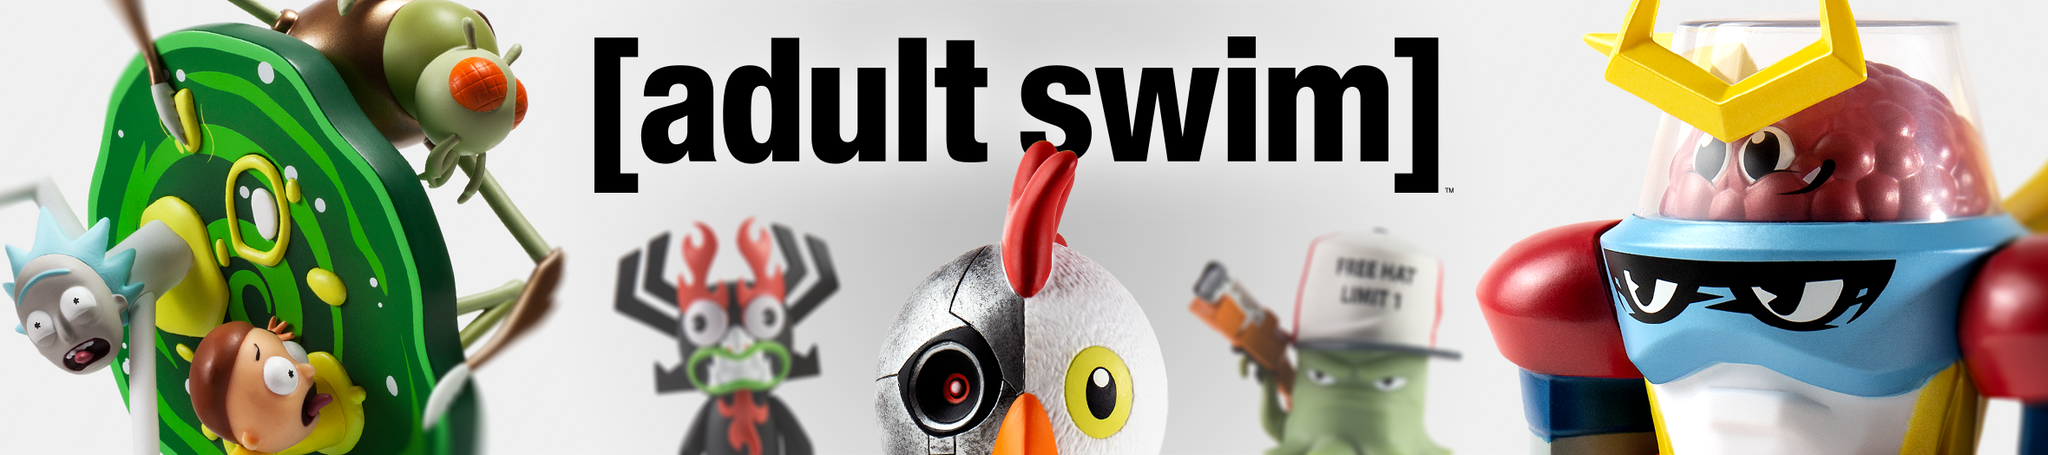 Adult Swim Toys, Figures and Art by Kidrobot